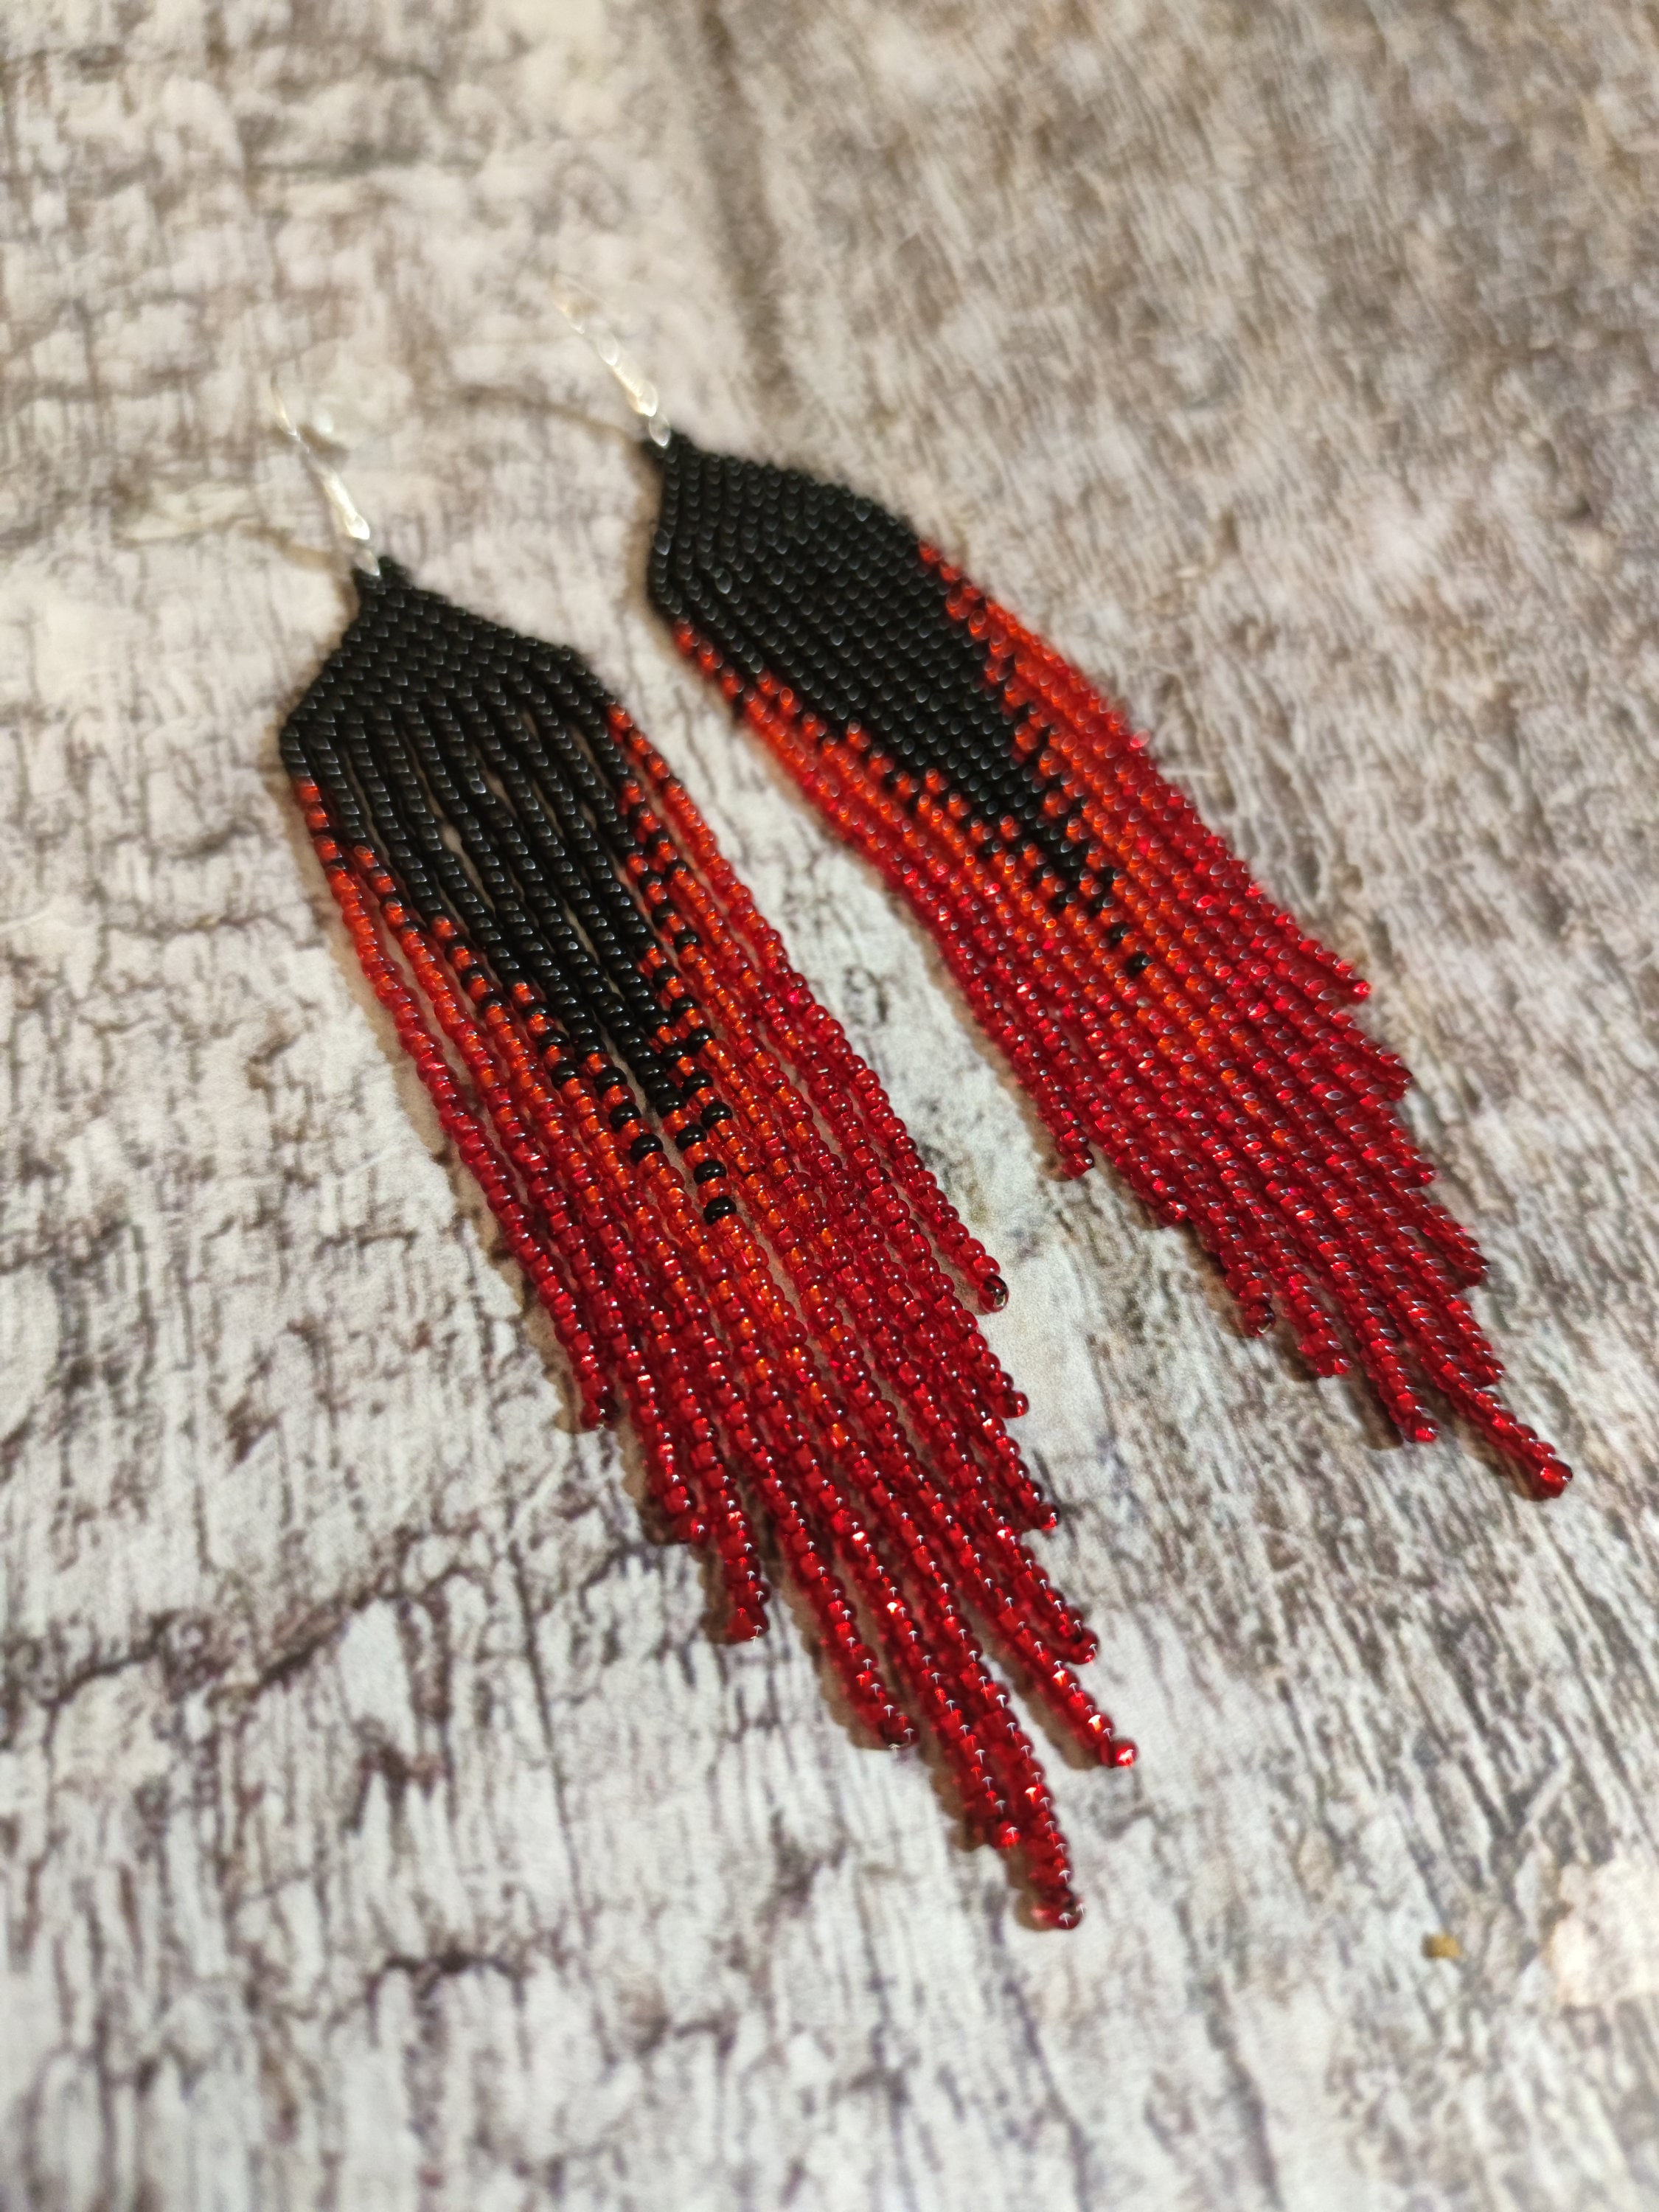 Red and black beaded earrings that dangle